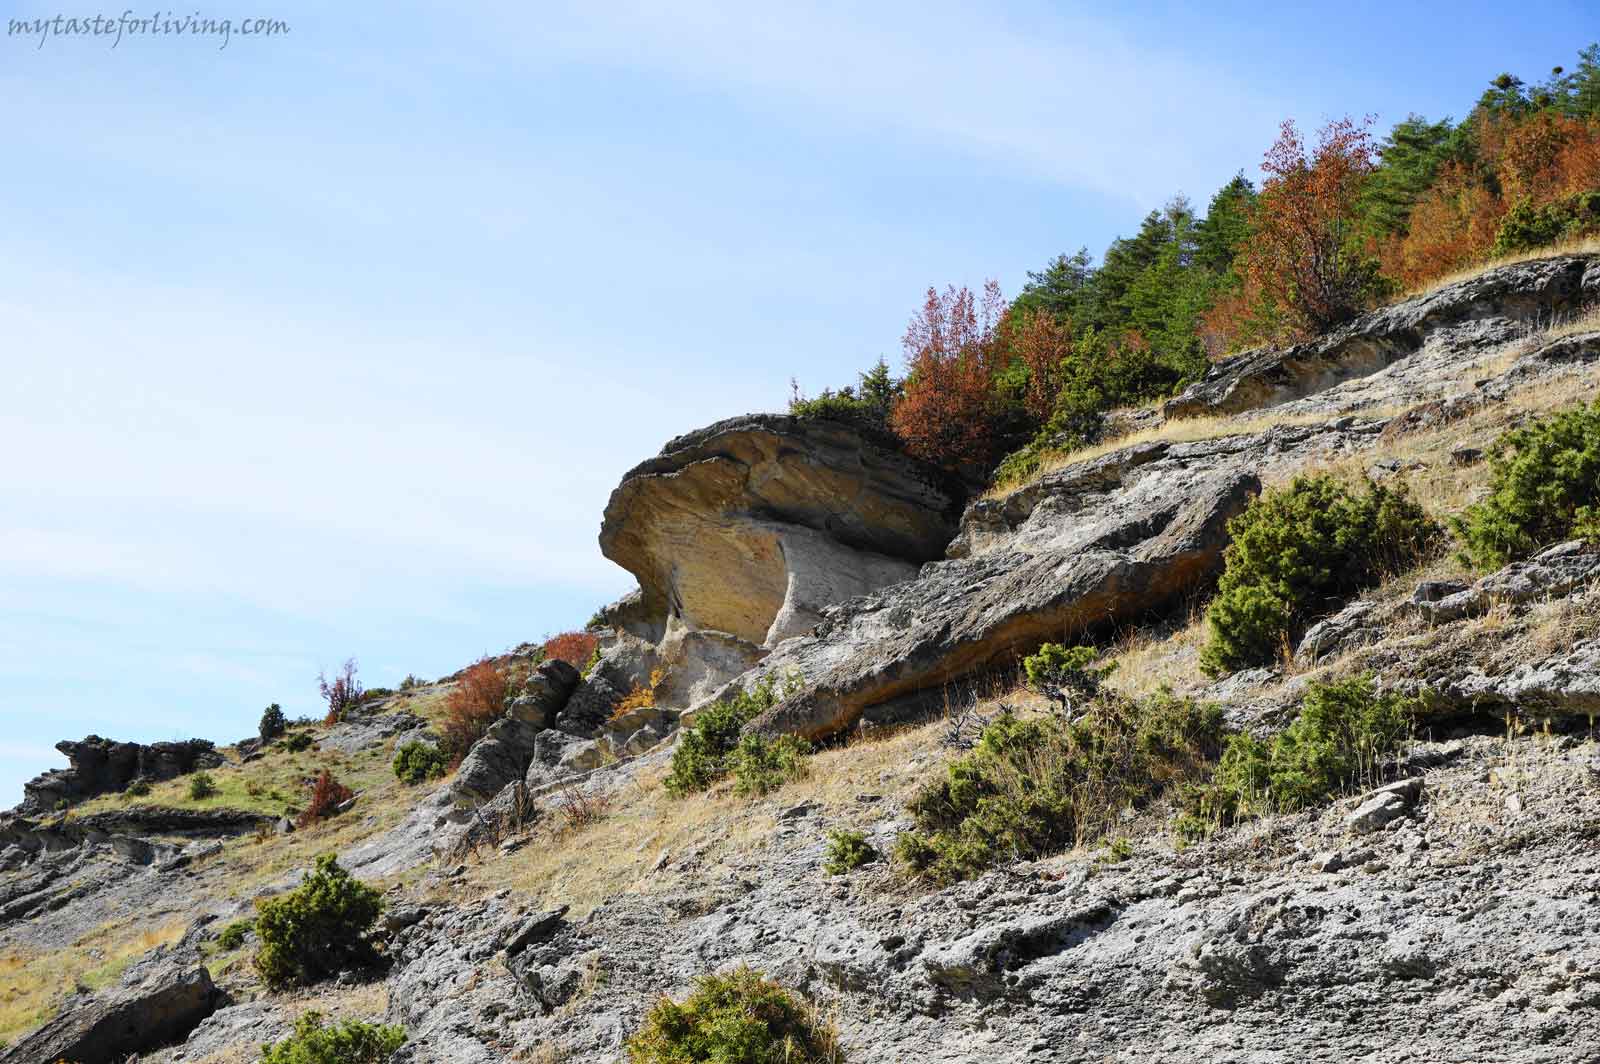 A magical place with an amazing view that will charge you with a lot of positive energy. Among the rock forms you can recognize stone mushrooms, figures of animals, faces and the characteristic for the Eastern Rhodopes trapezoidal rock niches, whose purpose remains a mystery.